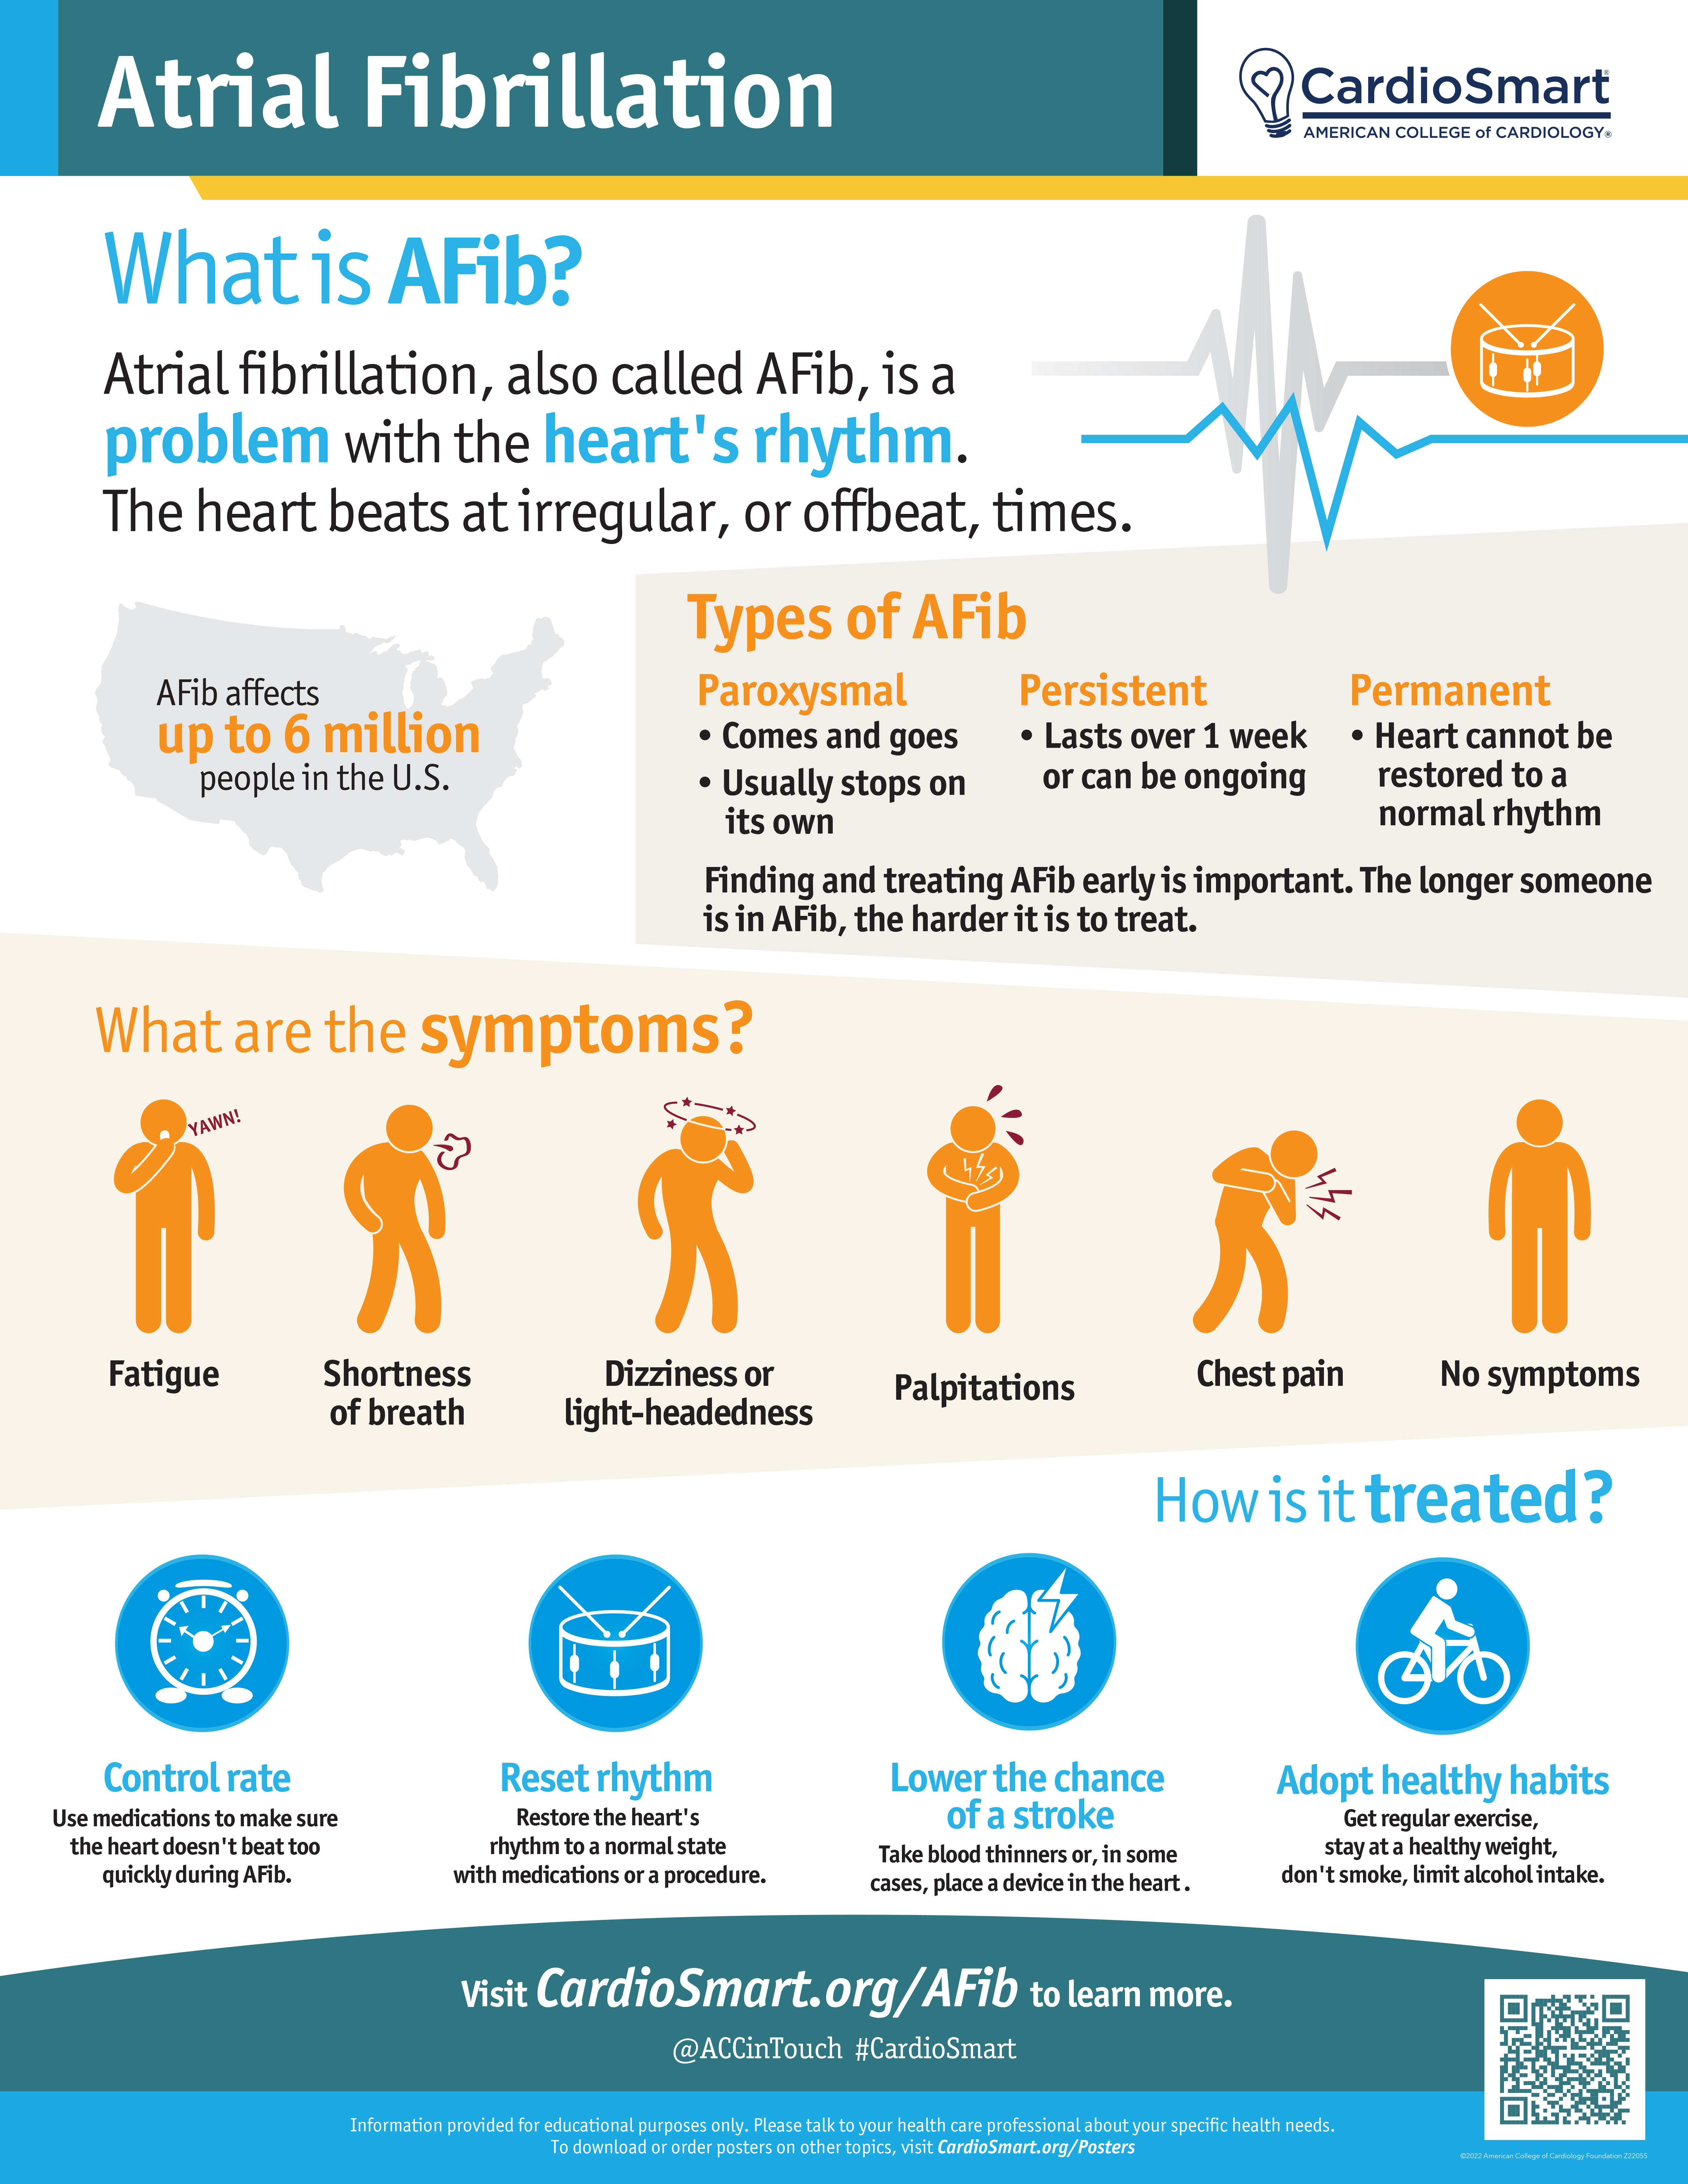 What is Atrial fibrillation?